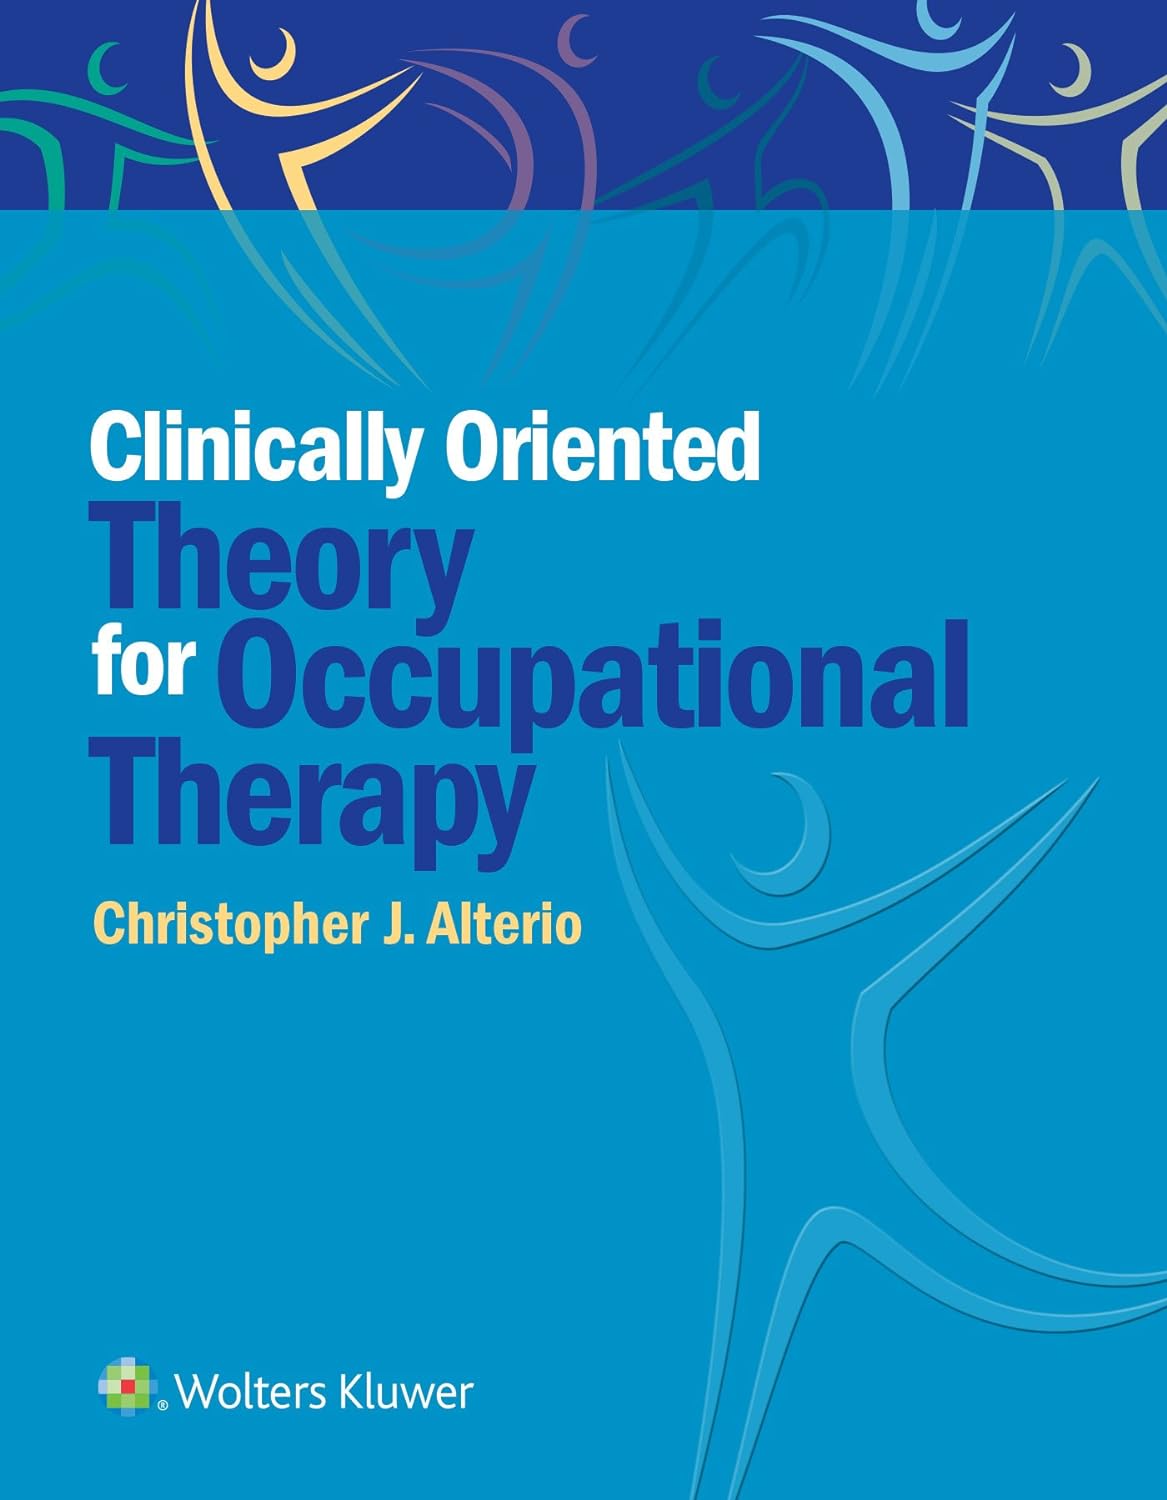 Clinically-Oriented Theory for Occupational Therapy First Edition